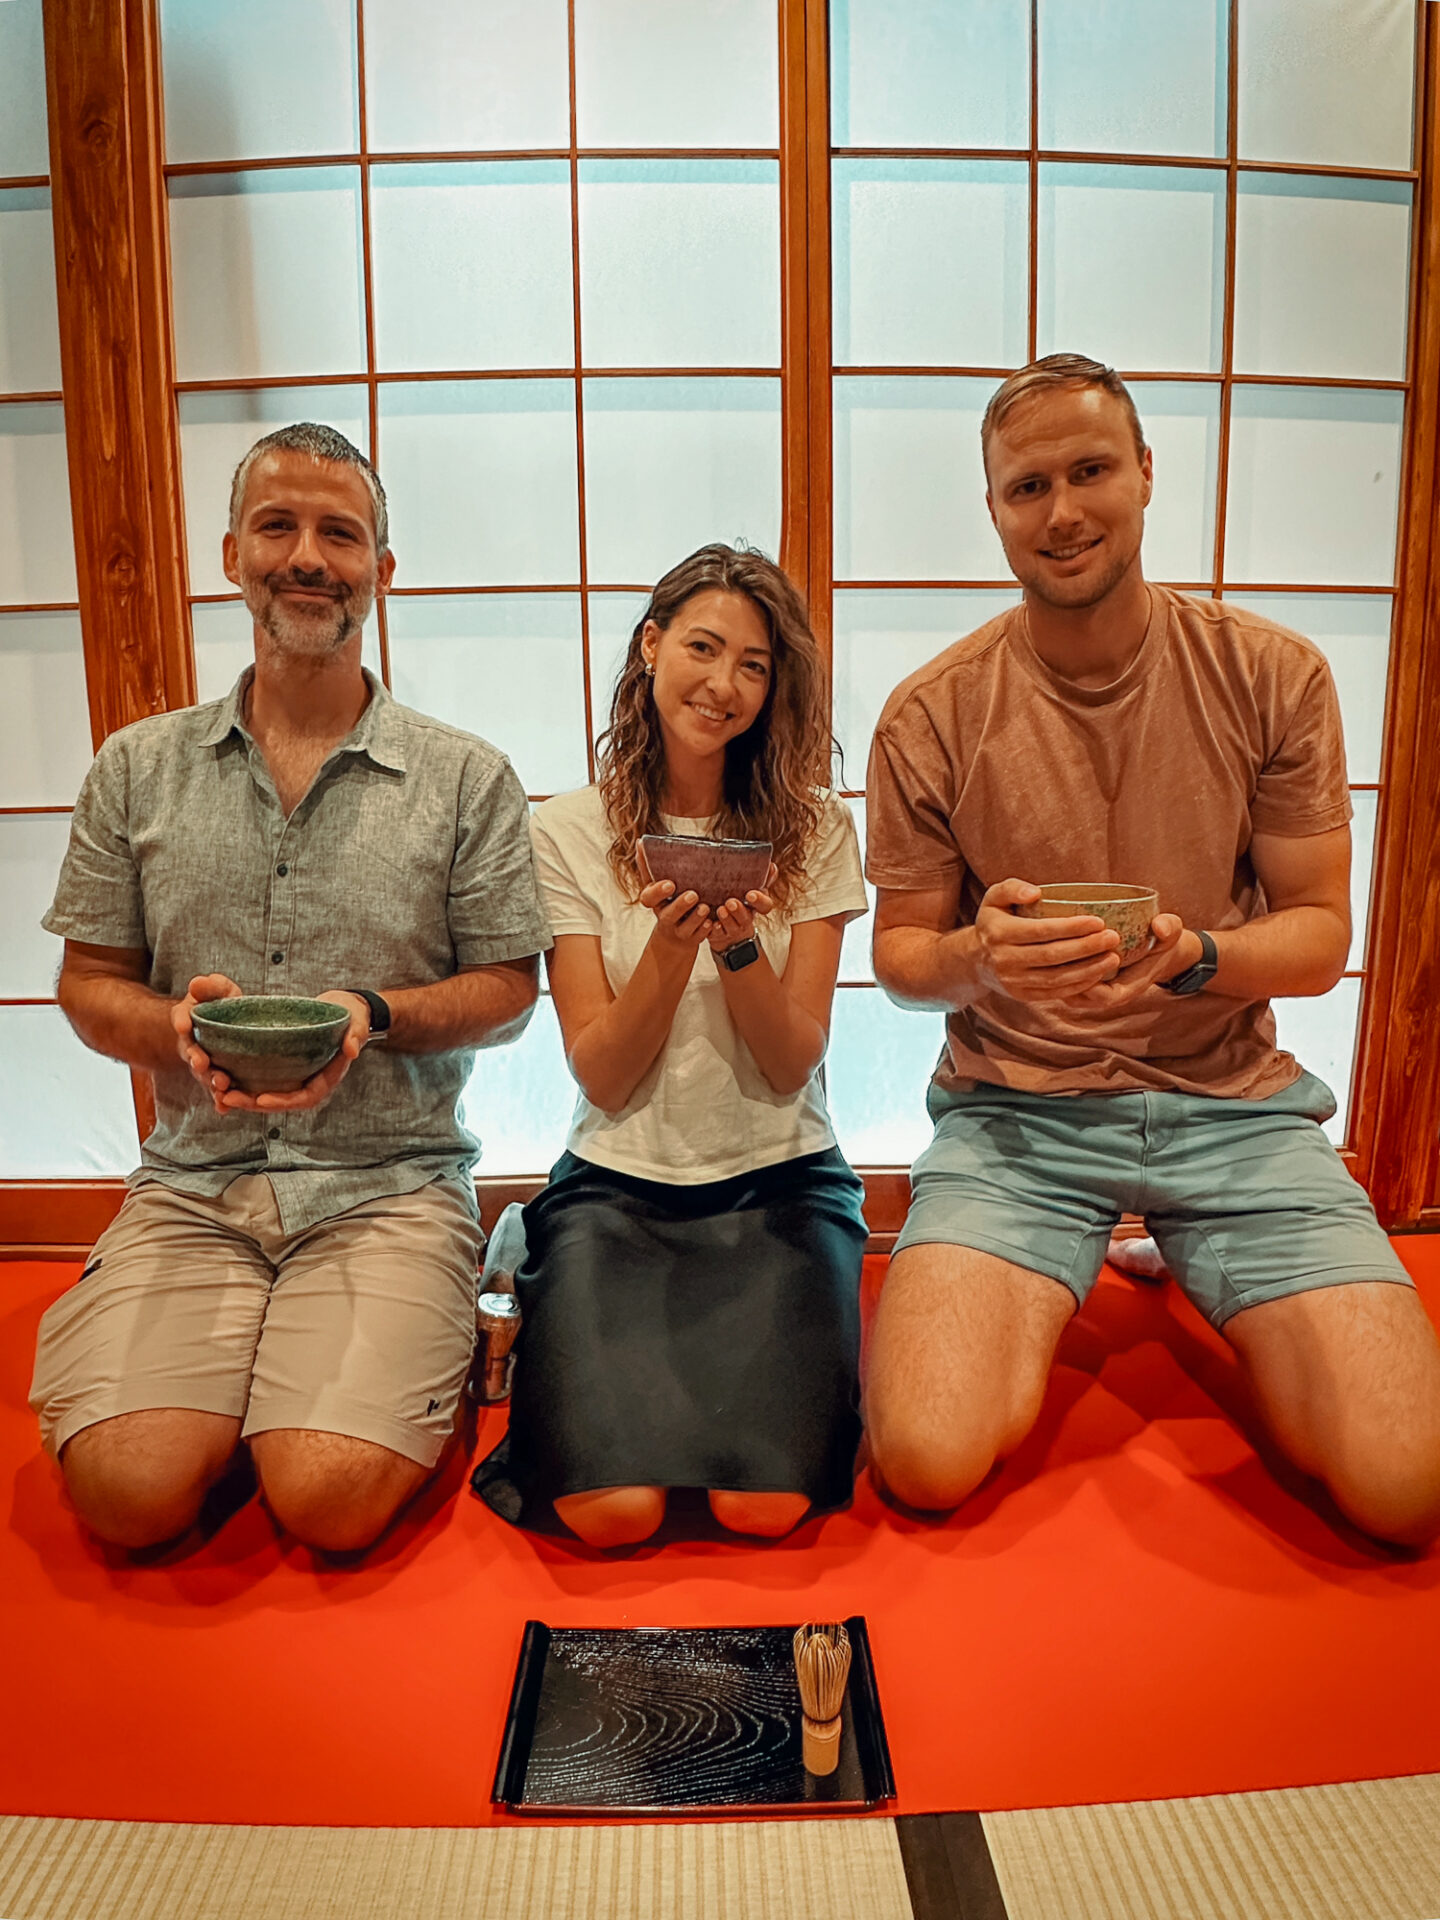 Matcha tea ceremony is one of the most popular things to do in Osaka